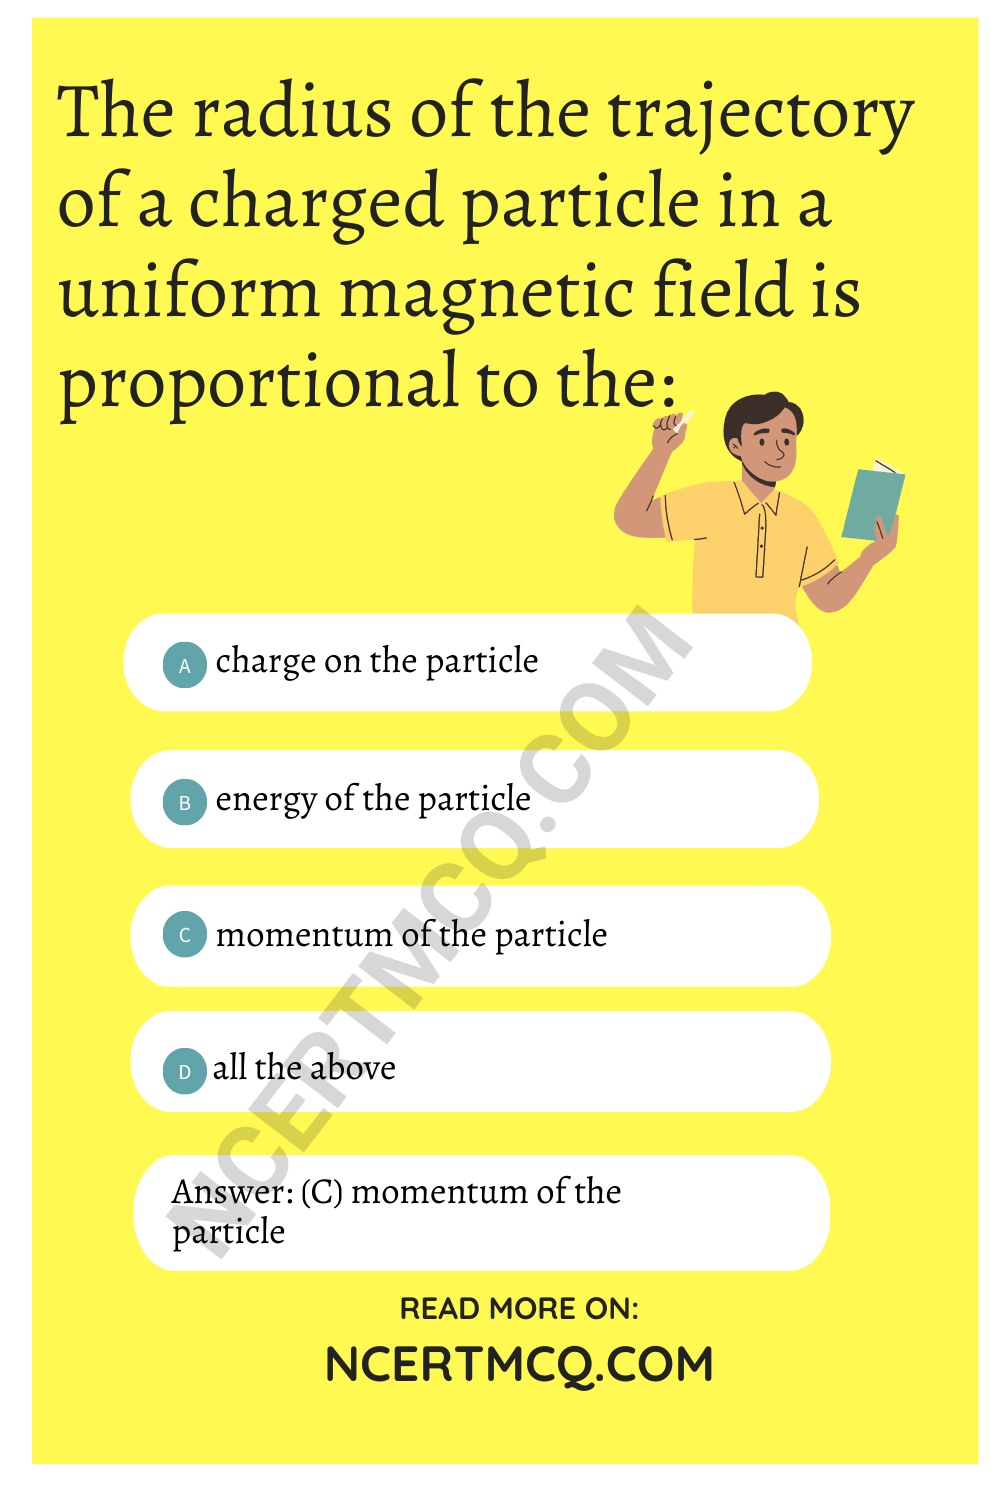 The radius of the trajectory of a charged particle in a uniform magnetic field is proportional to the: